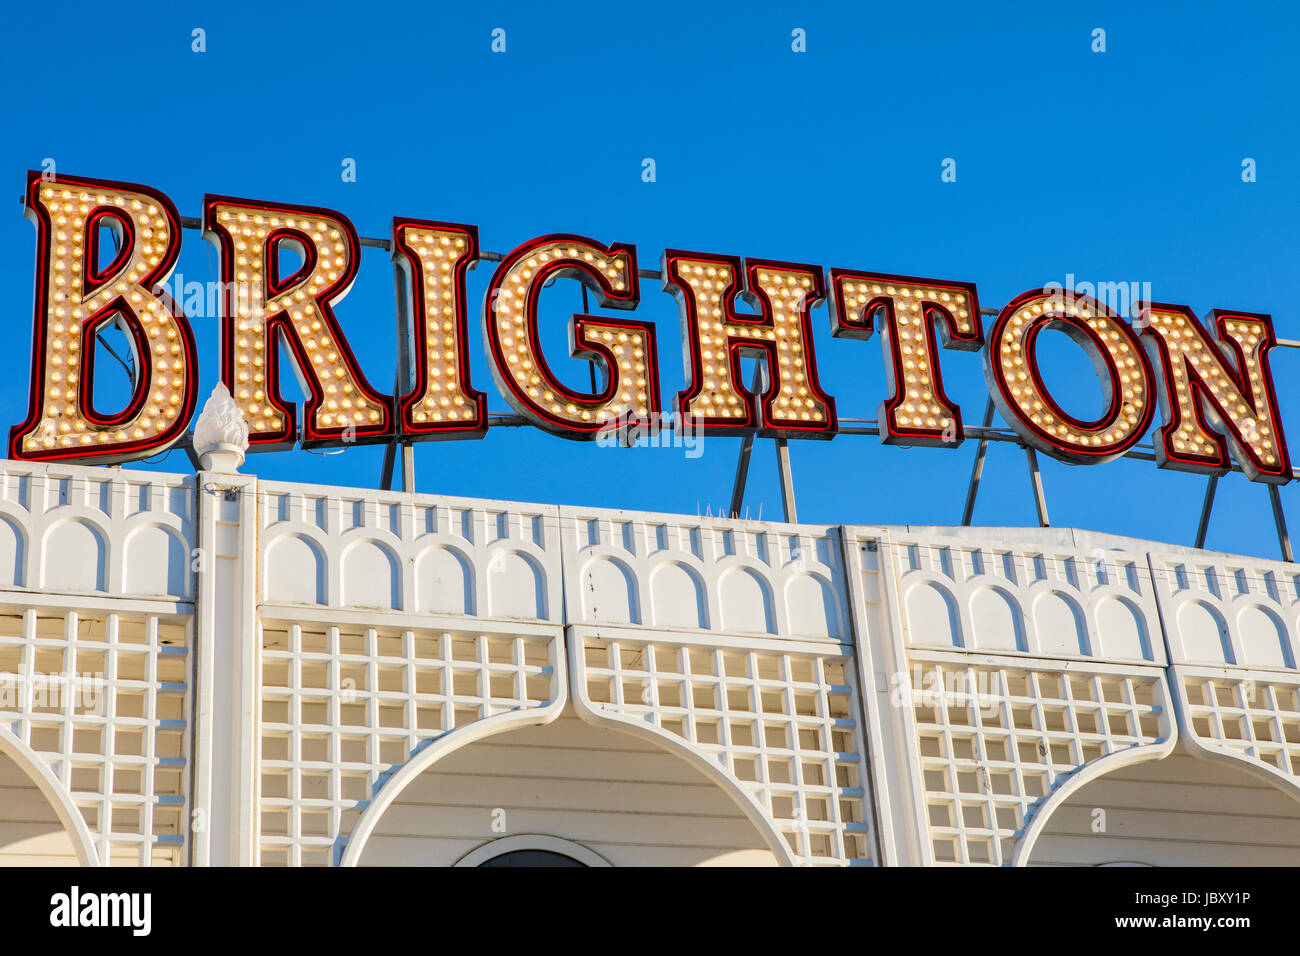 BRIGHTON, UK - MAY 31ST 2017: Brighton in lights on the historic Brighton Pier in East Sussex, UK, on 31st May 2017. Stock Photo